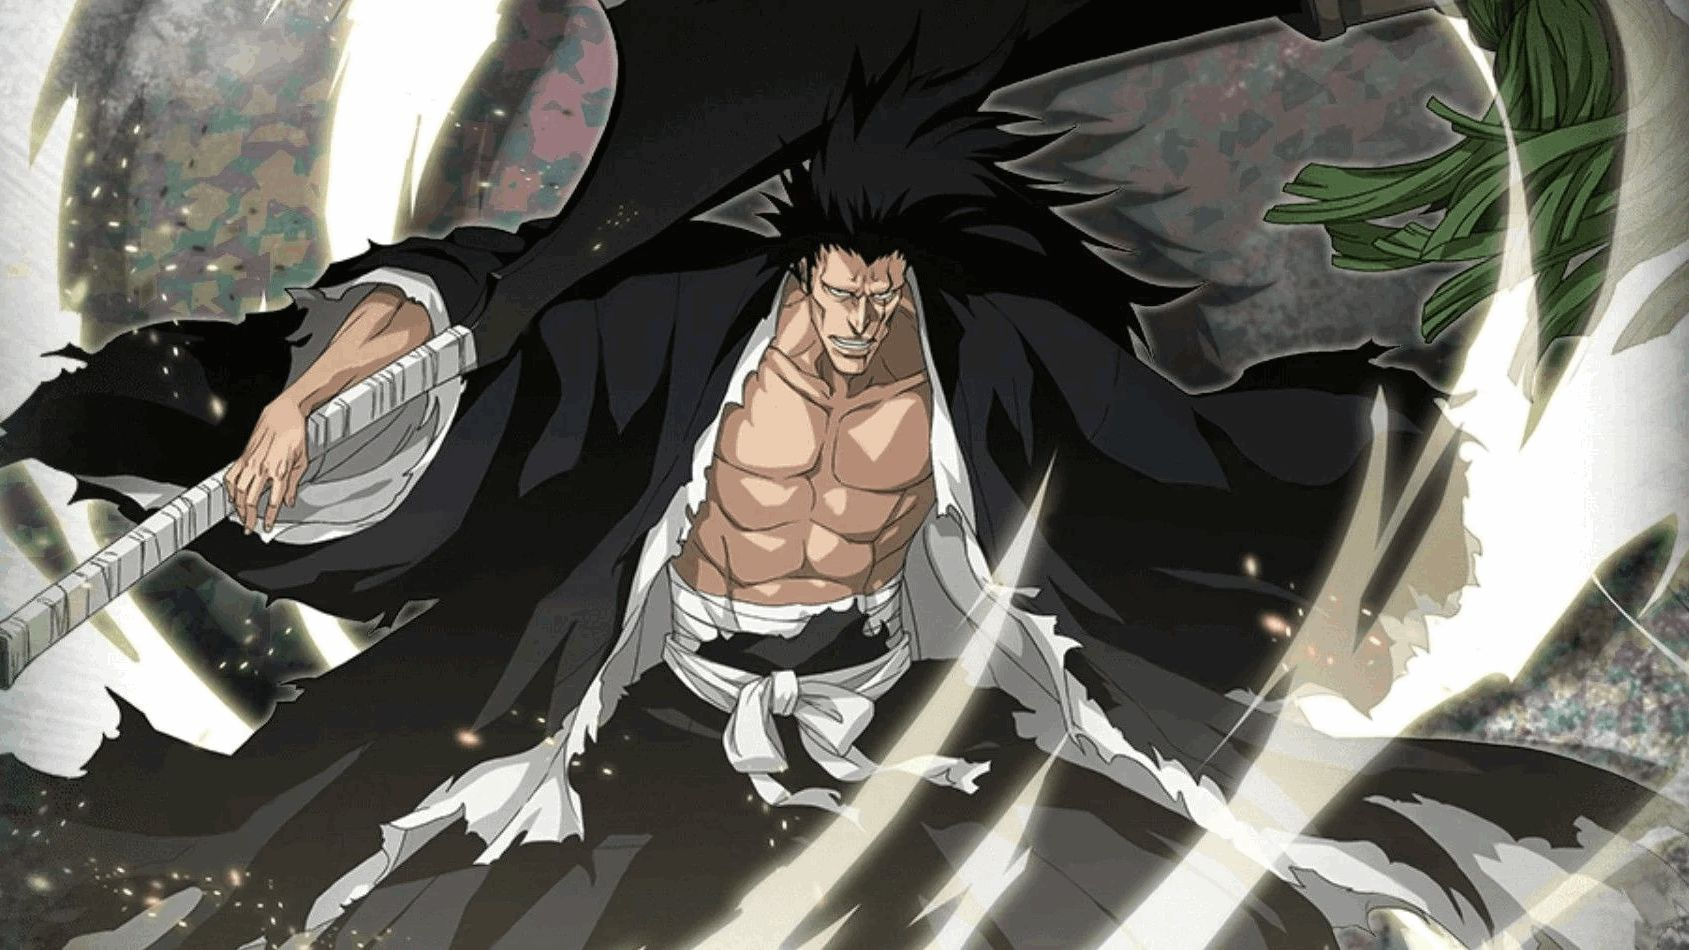 Which are the Strongest Swords in the Bleach Series? Find out an amazing Top 10 Swords